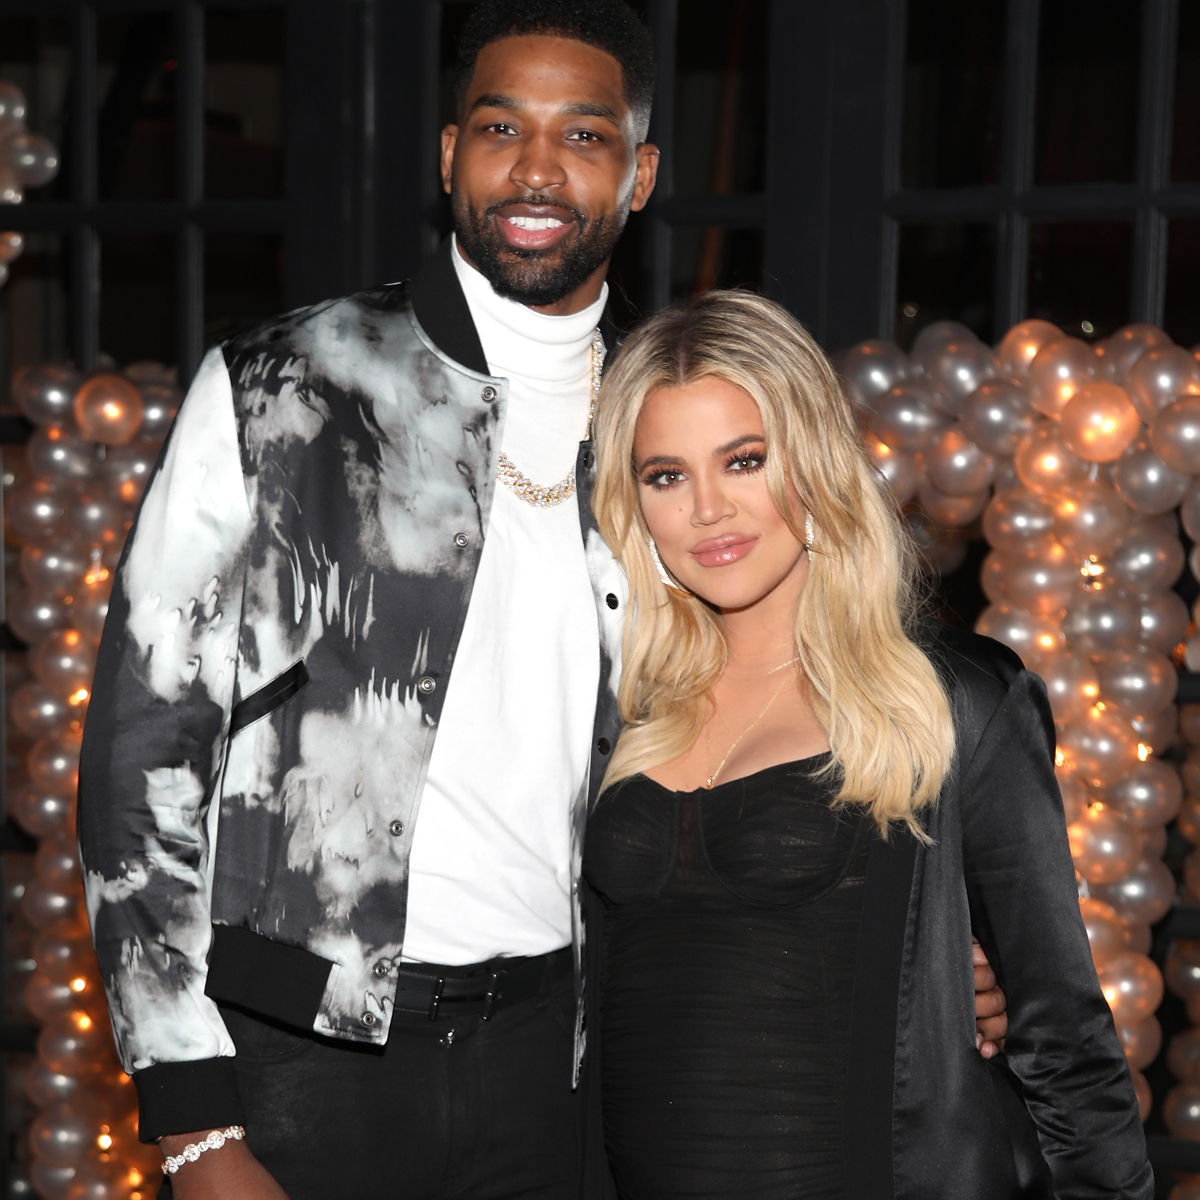 Khloe Kardashian Posts About Not Caring What Others Think Following Tristan Thompson's Boston Trip - E! NEWS